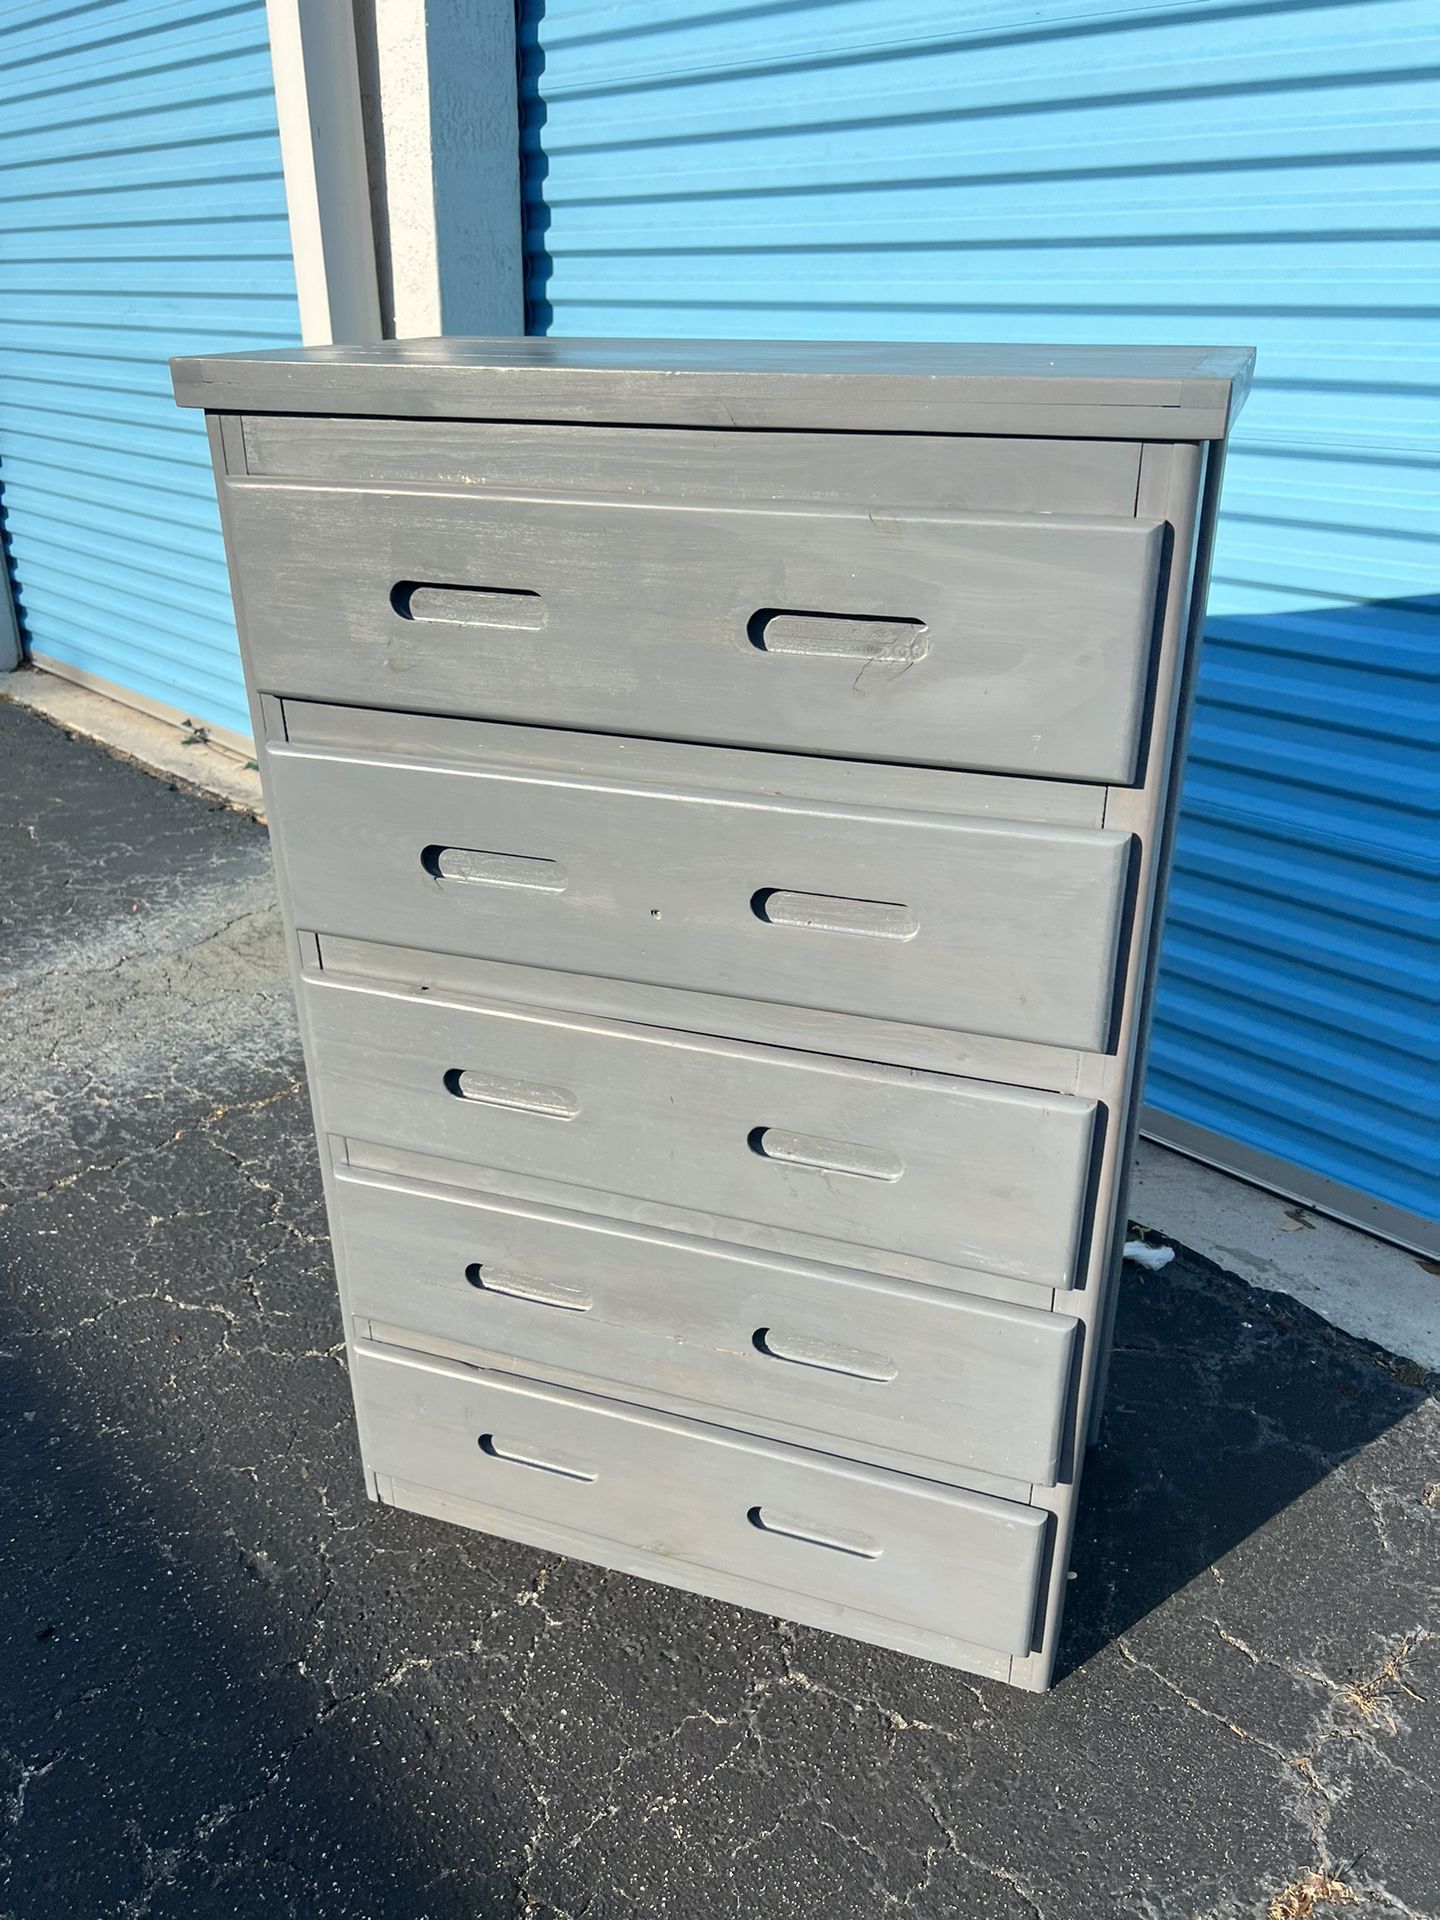 Delivery Available! Grey Rustic Solid Wooden Bedroom Dresser Bureau Tall Boy Storage Chest! The bottom two drawers fall when pulled too far. Drawers a